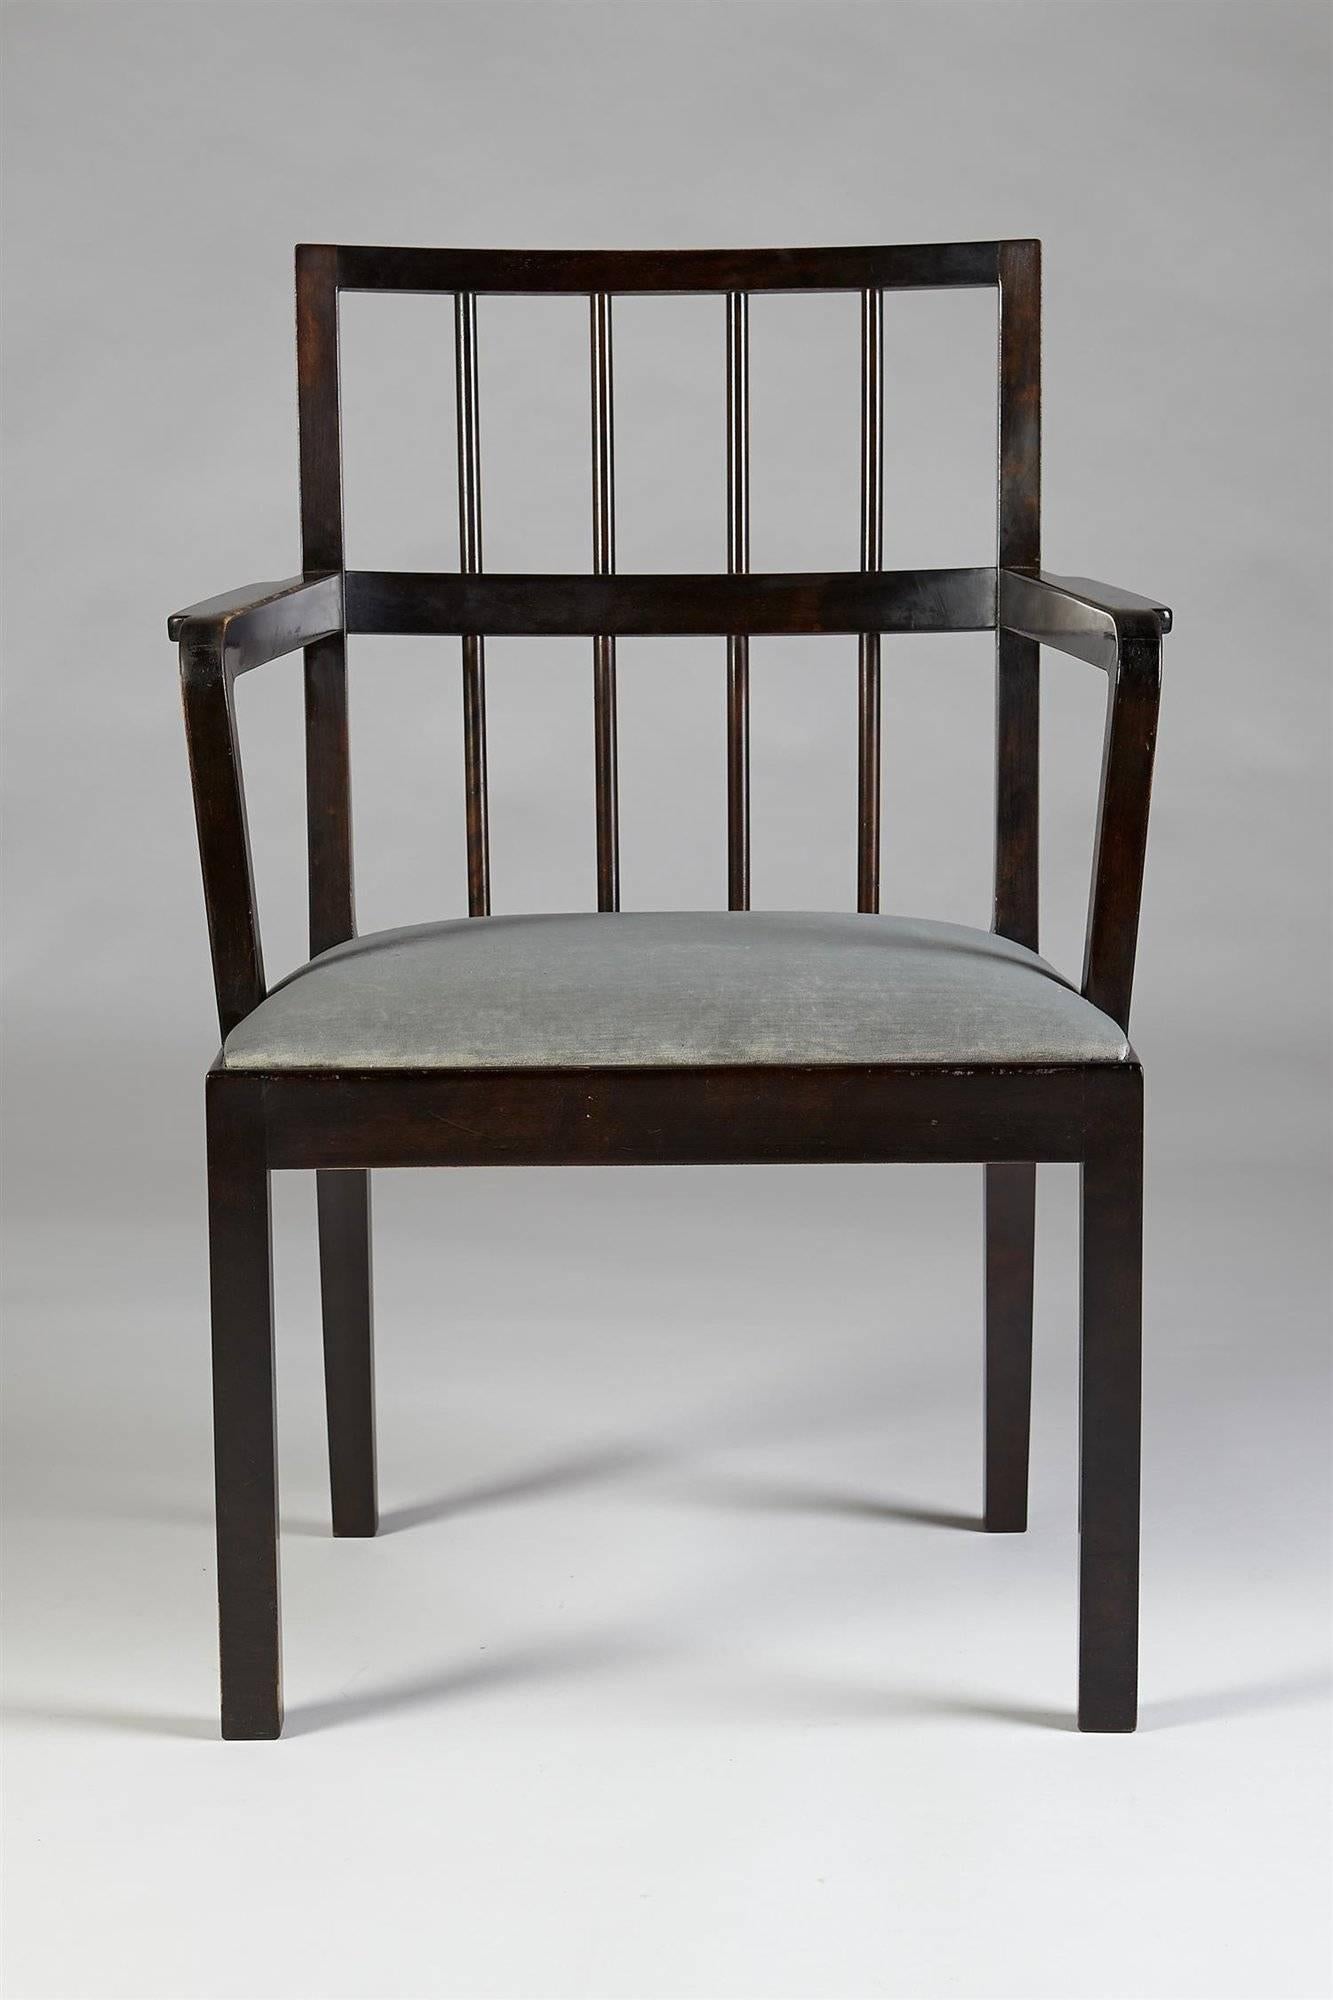 Swedish Set of Four Chairs, Designed by Axel Einar Hjorth for NK, Sweden, 1930s